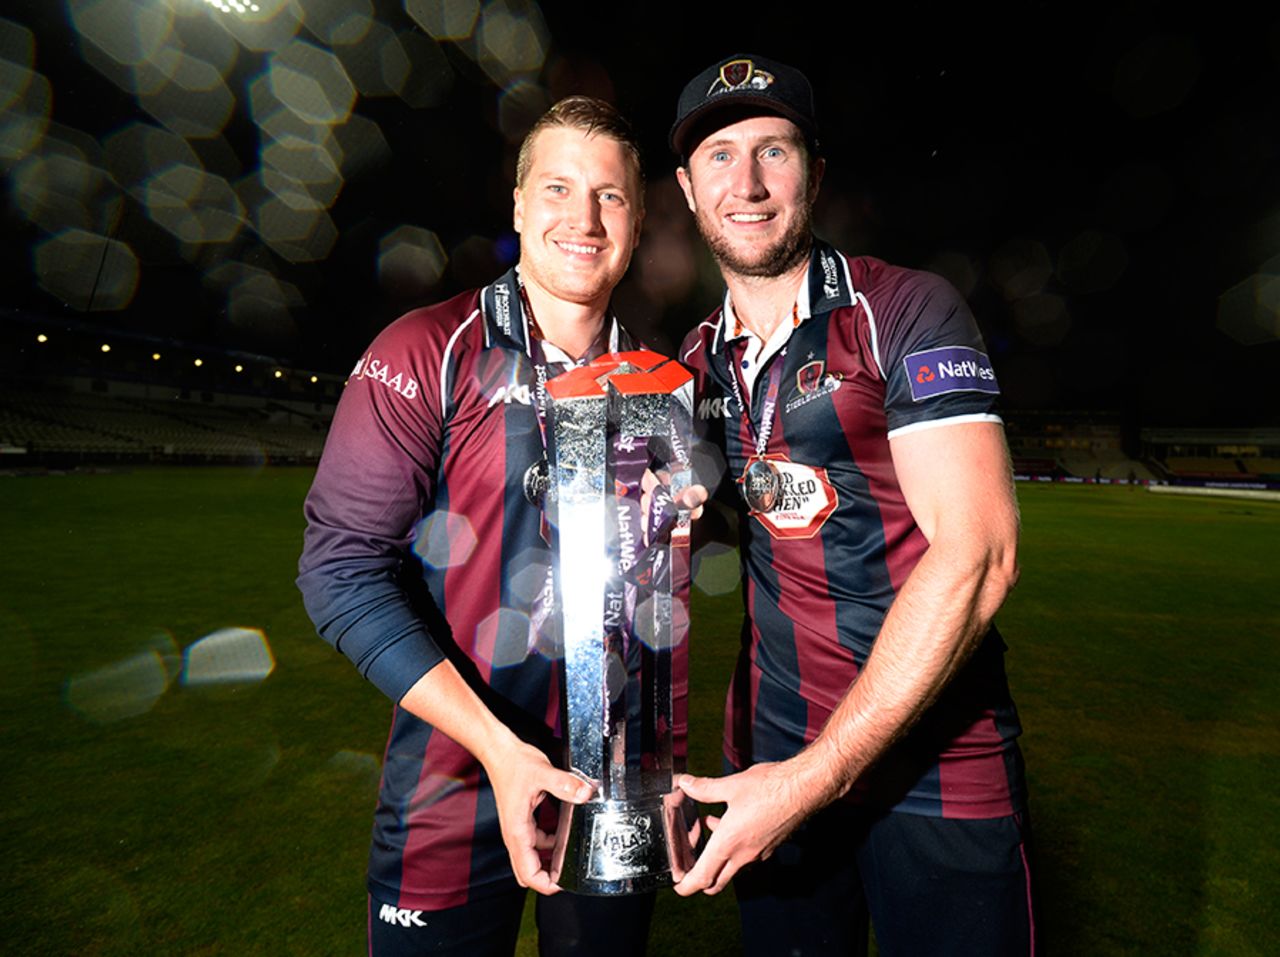 Josh Cobb and Alex Wakely played important knocks in Northamptonshire's chase, Durham v Northamptonshire, NatWest T20 Blast final, Edgbaston, August 20, 2016